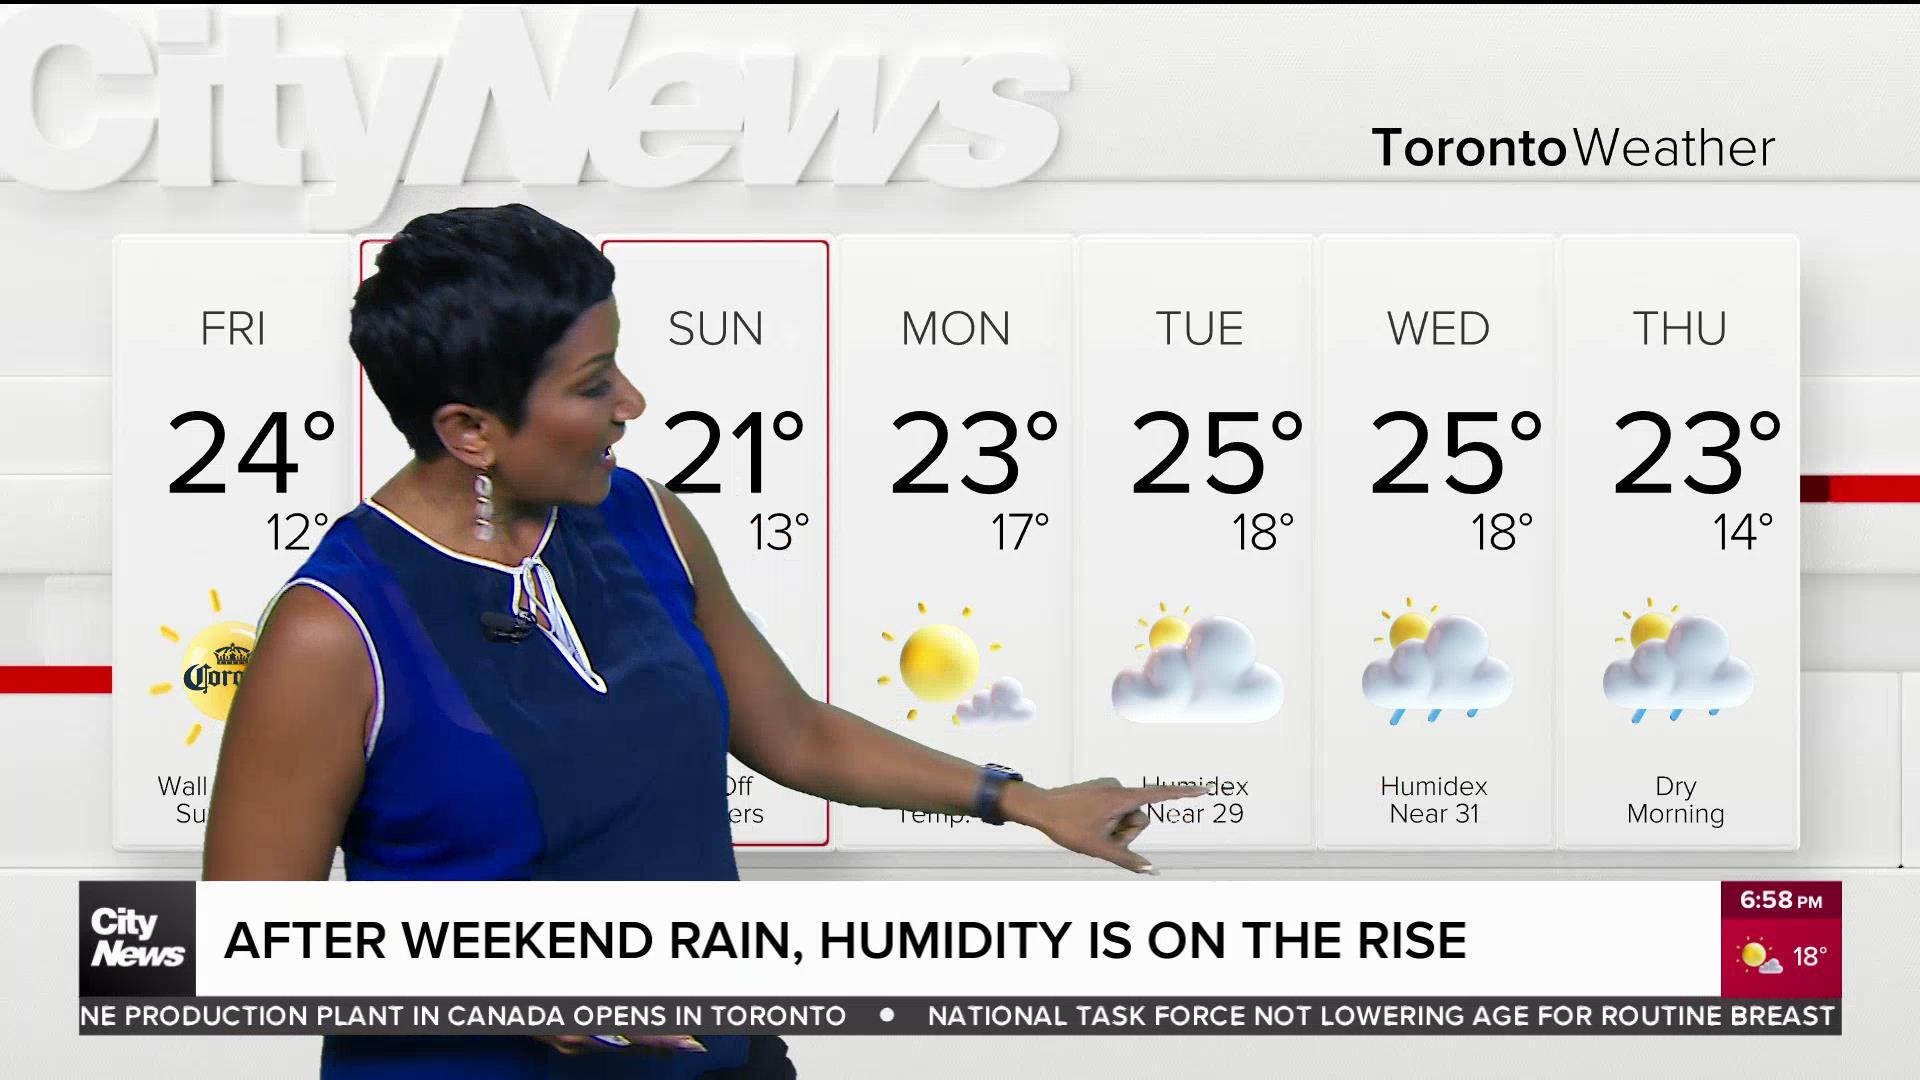 After weekend rain, humidity on the rise